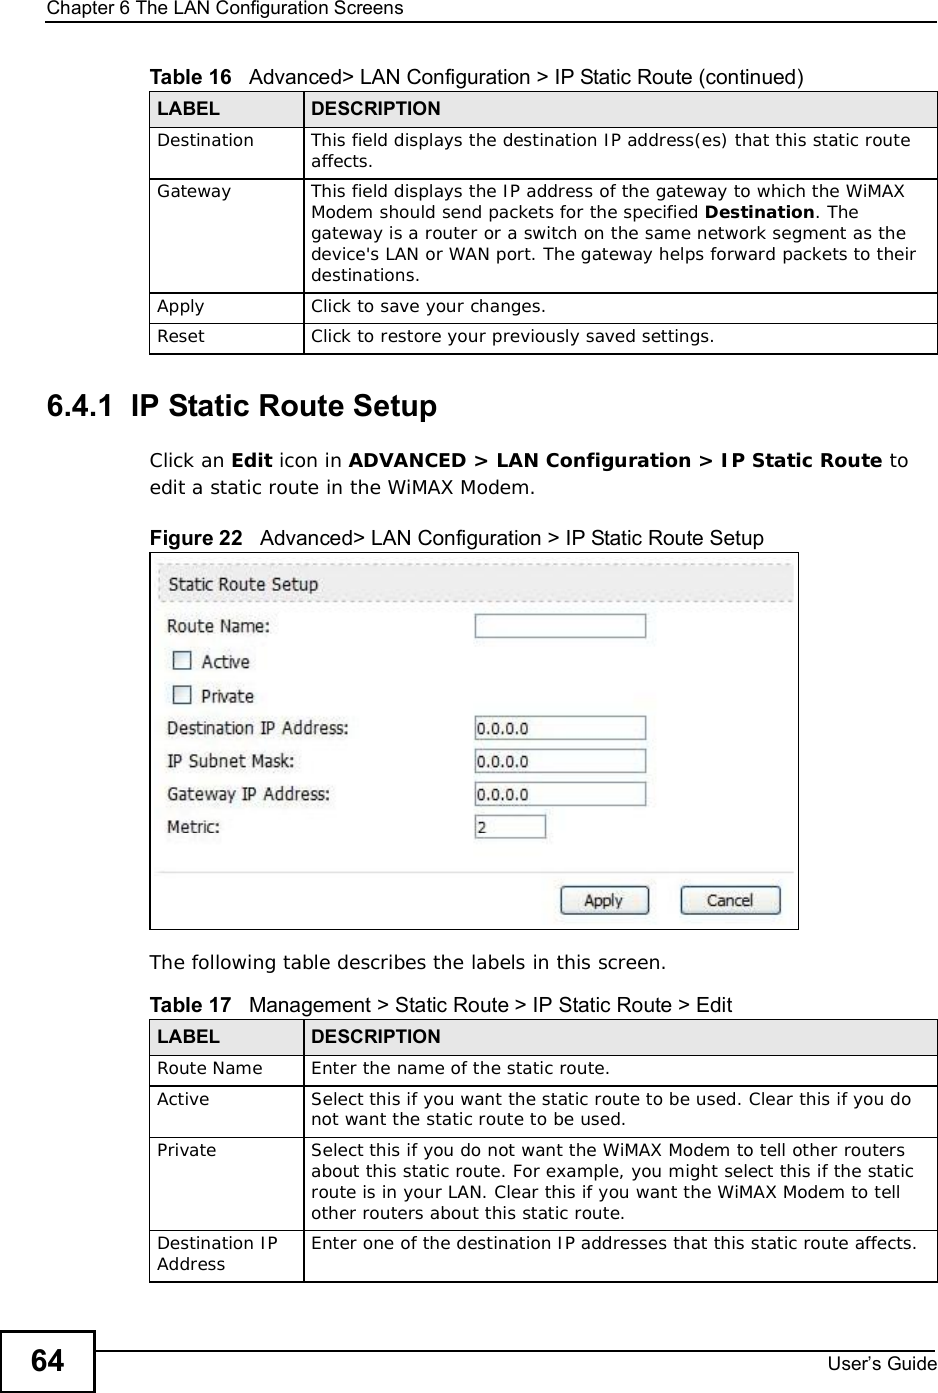 Chapter 6The LAN Configuration ScreensUser s Guide646.4.1  IP Static Route SetupClick an Edit icon in ADVANCED &gt; LAN Configuration &gt; IP Static Route to edit a static route in the WiMAX Modem.Figure 22   Advanced&gt; LAN Configuration &gt; IP Static Route SetupThe following table describes the labels in this screen.Destination This field displays the destination IP address(es) that this static route affects.Gateway This field displays the IP address of the gateway to which the WiMAX Modem should send packets for the specified Destination. The gateway is a router or a switch on the same network segment as the device&apos;s LAN or WAN port. The gateway helps forward packets to their destinations.Apply Click to save your changes.Reset Click to restore your previously saved settings.Table 16   Advanced&gt; LAN Configuration &gt; IP Static Route (continued)LABEL DESCRIPTIONTable 17   Management &gt; Static Route &gt; IP Static Route &gt; EditLABEL DESCRIPTIONRoute Name Enter the name of the static route.Active Select this if you want the static route to be used. Clear this if you do not want the static route to be used.Private Select this if you do not want the WiMAX Modem to tell other routers about this static route. For example, you might select this if the static route is in your LAN. Clear this if you want the WiMAX Modem to tell other routers about this static route.Destination IP Address Enter one of the destination IP addresses that this static route affects.